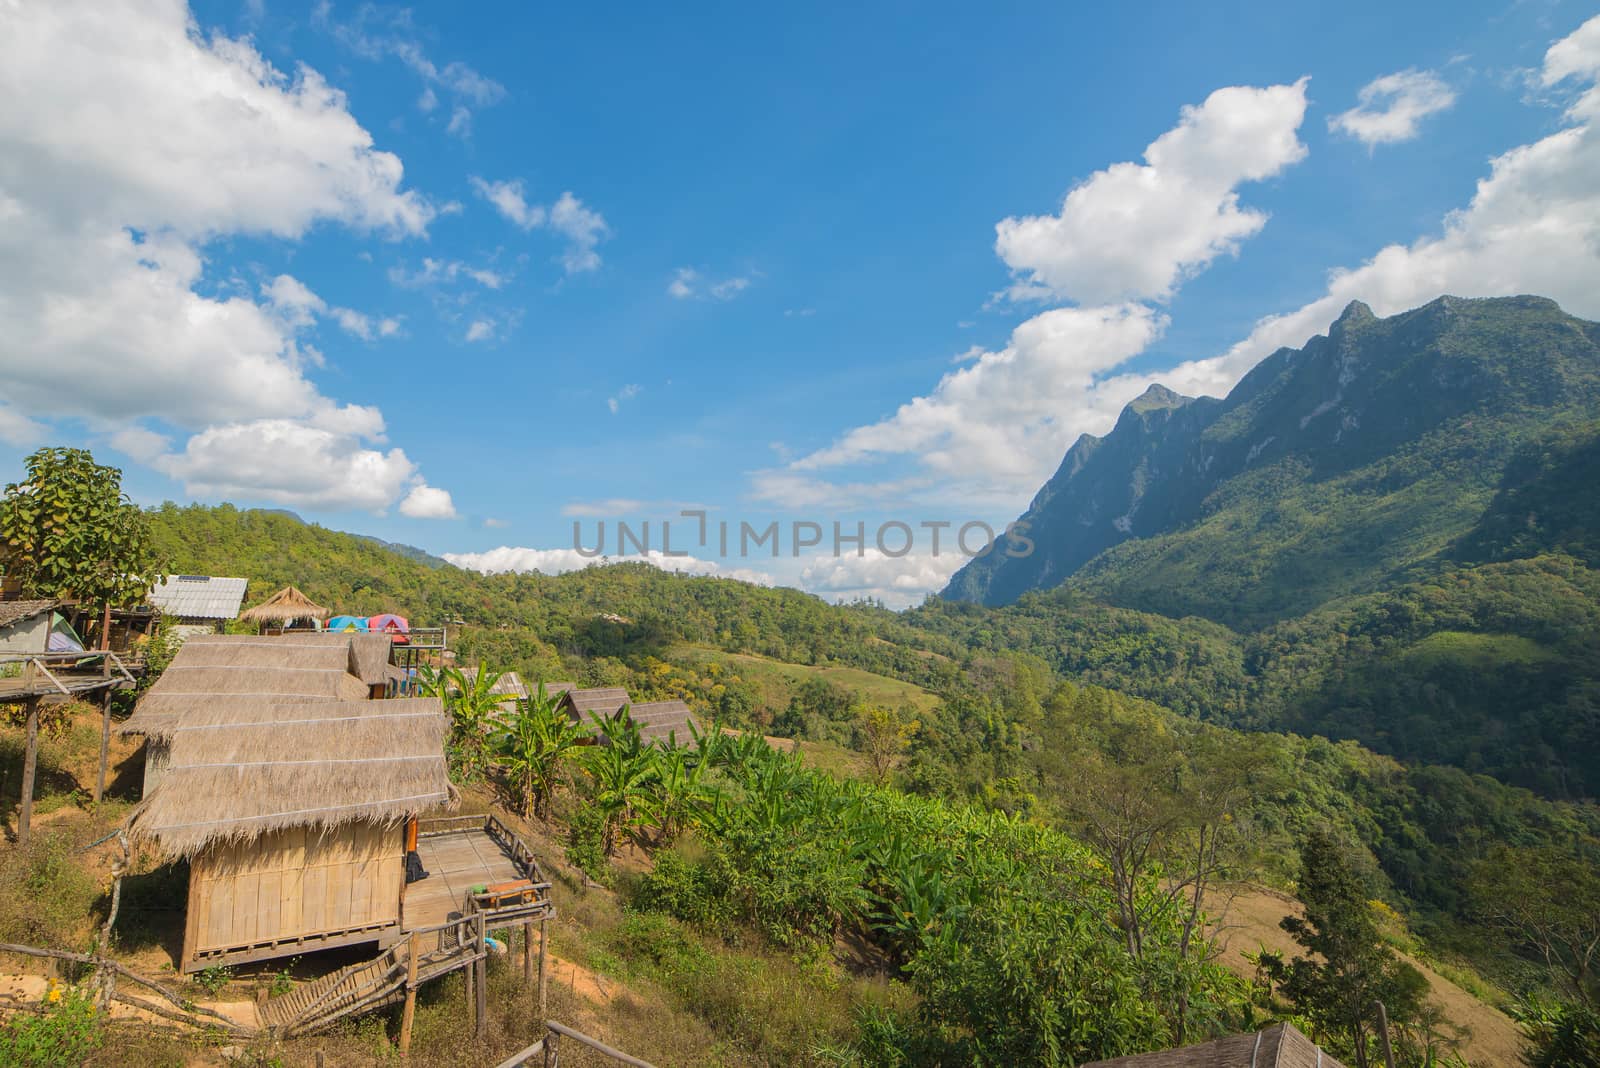 Landscape of hut in Mountain valley at Doi Luang Chiang Dao, ChiangMai Thailand.